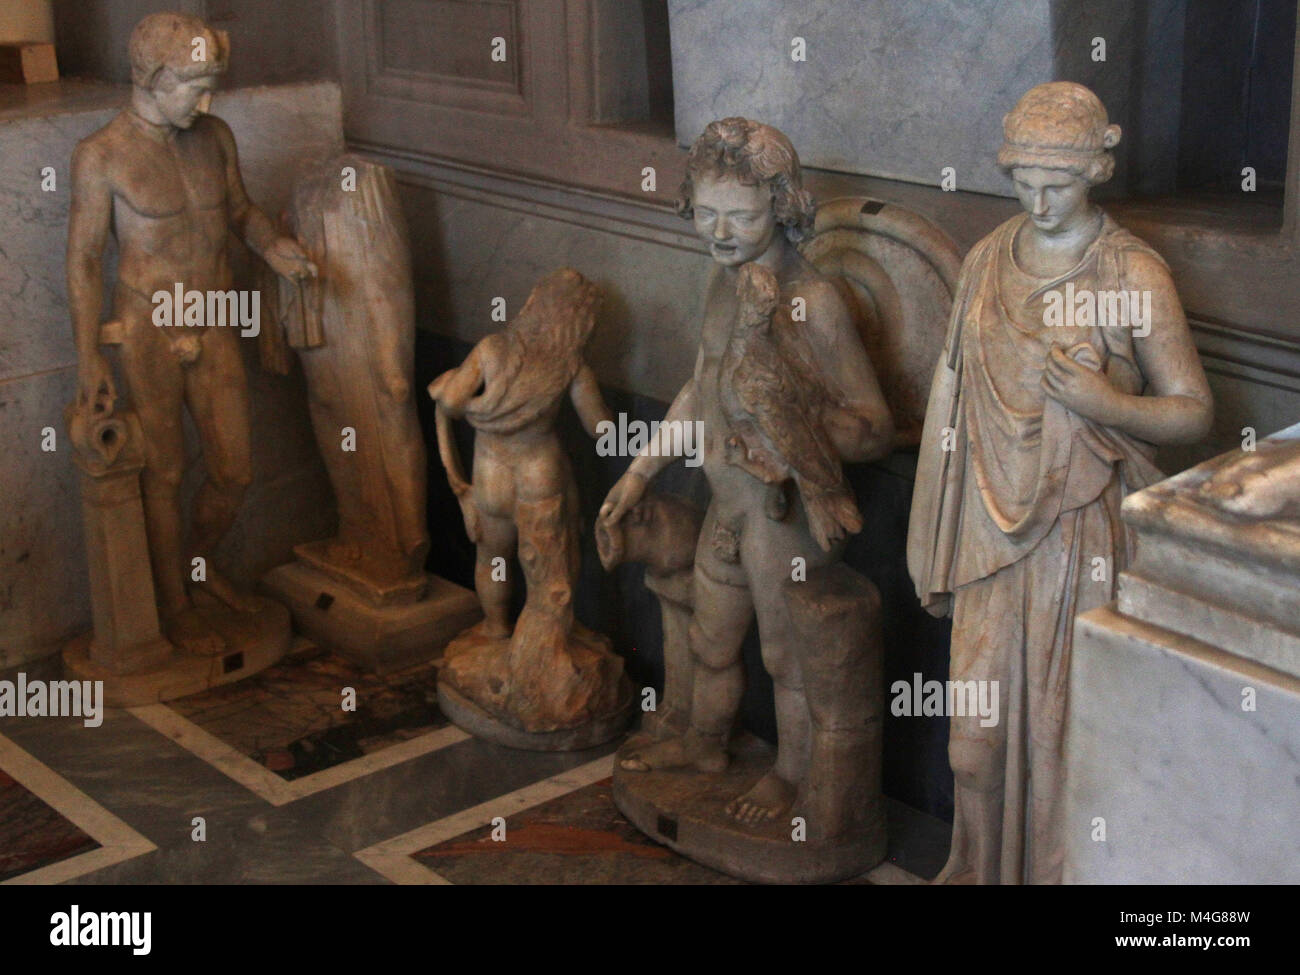 Sculptures within the Vatican Museum, Vatican City, Rome, Italy. Stock Photo